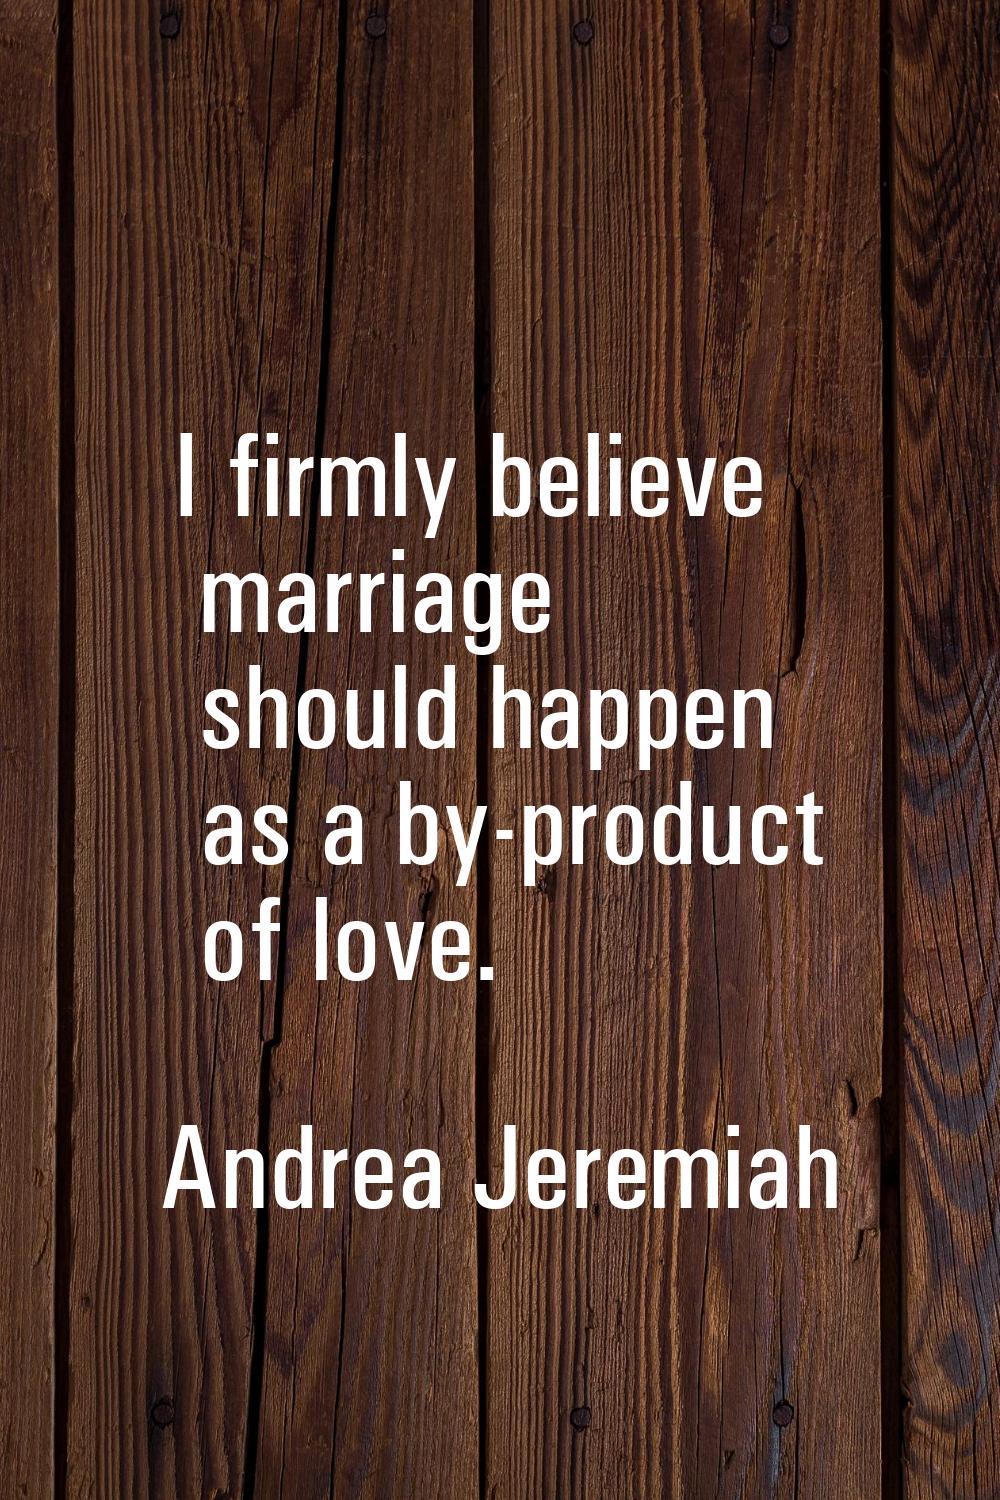 I firmly believe marriage should happen as a by-product of love.